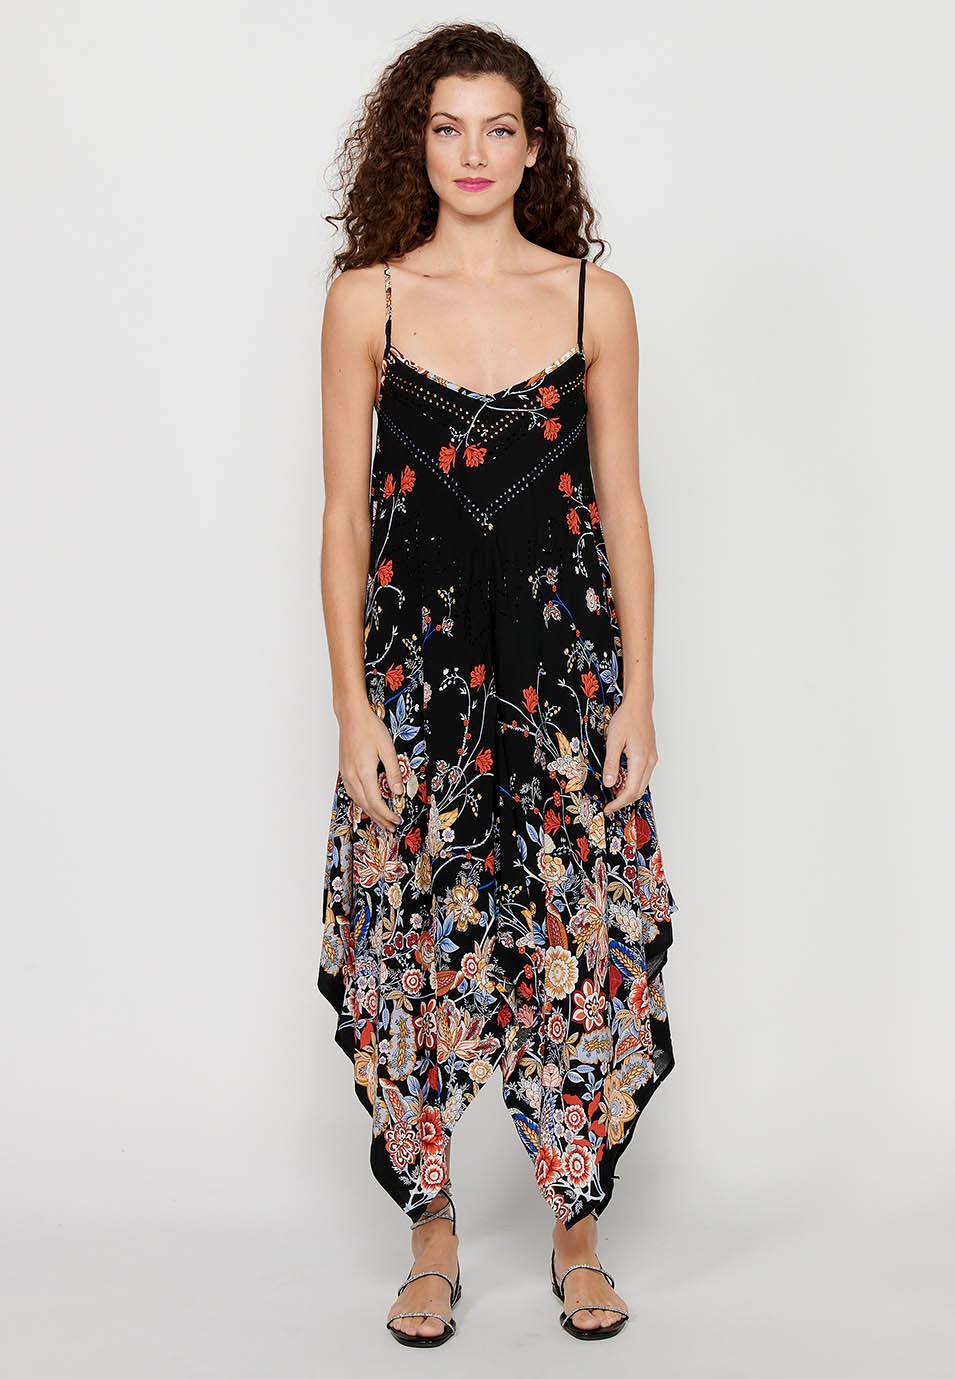 Strap Dress with V-neck and Black Floral Print for Women 6